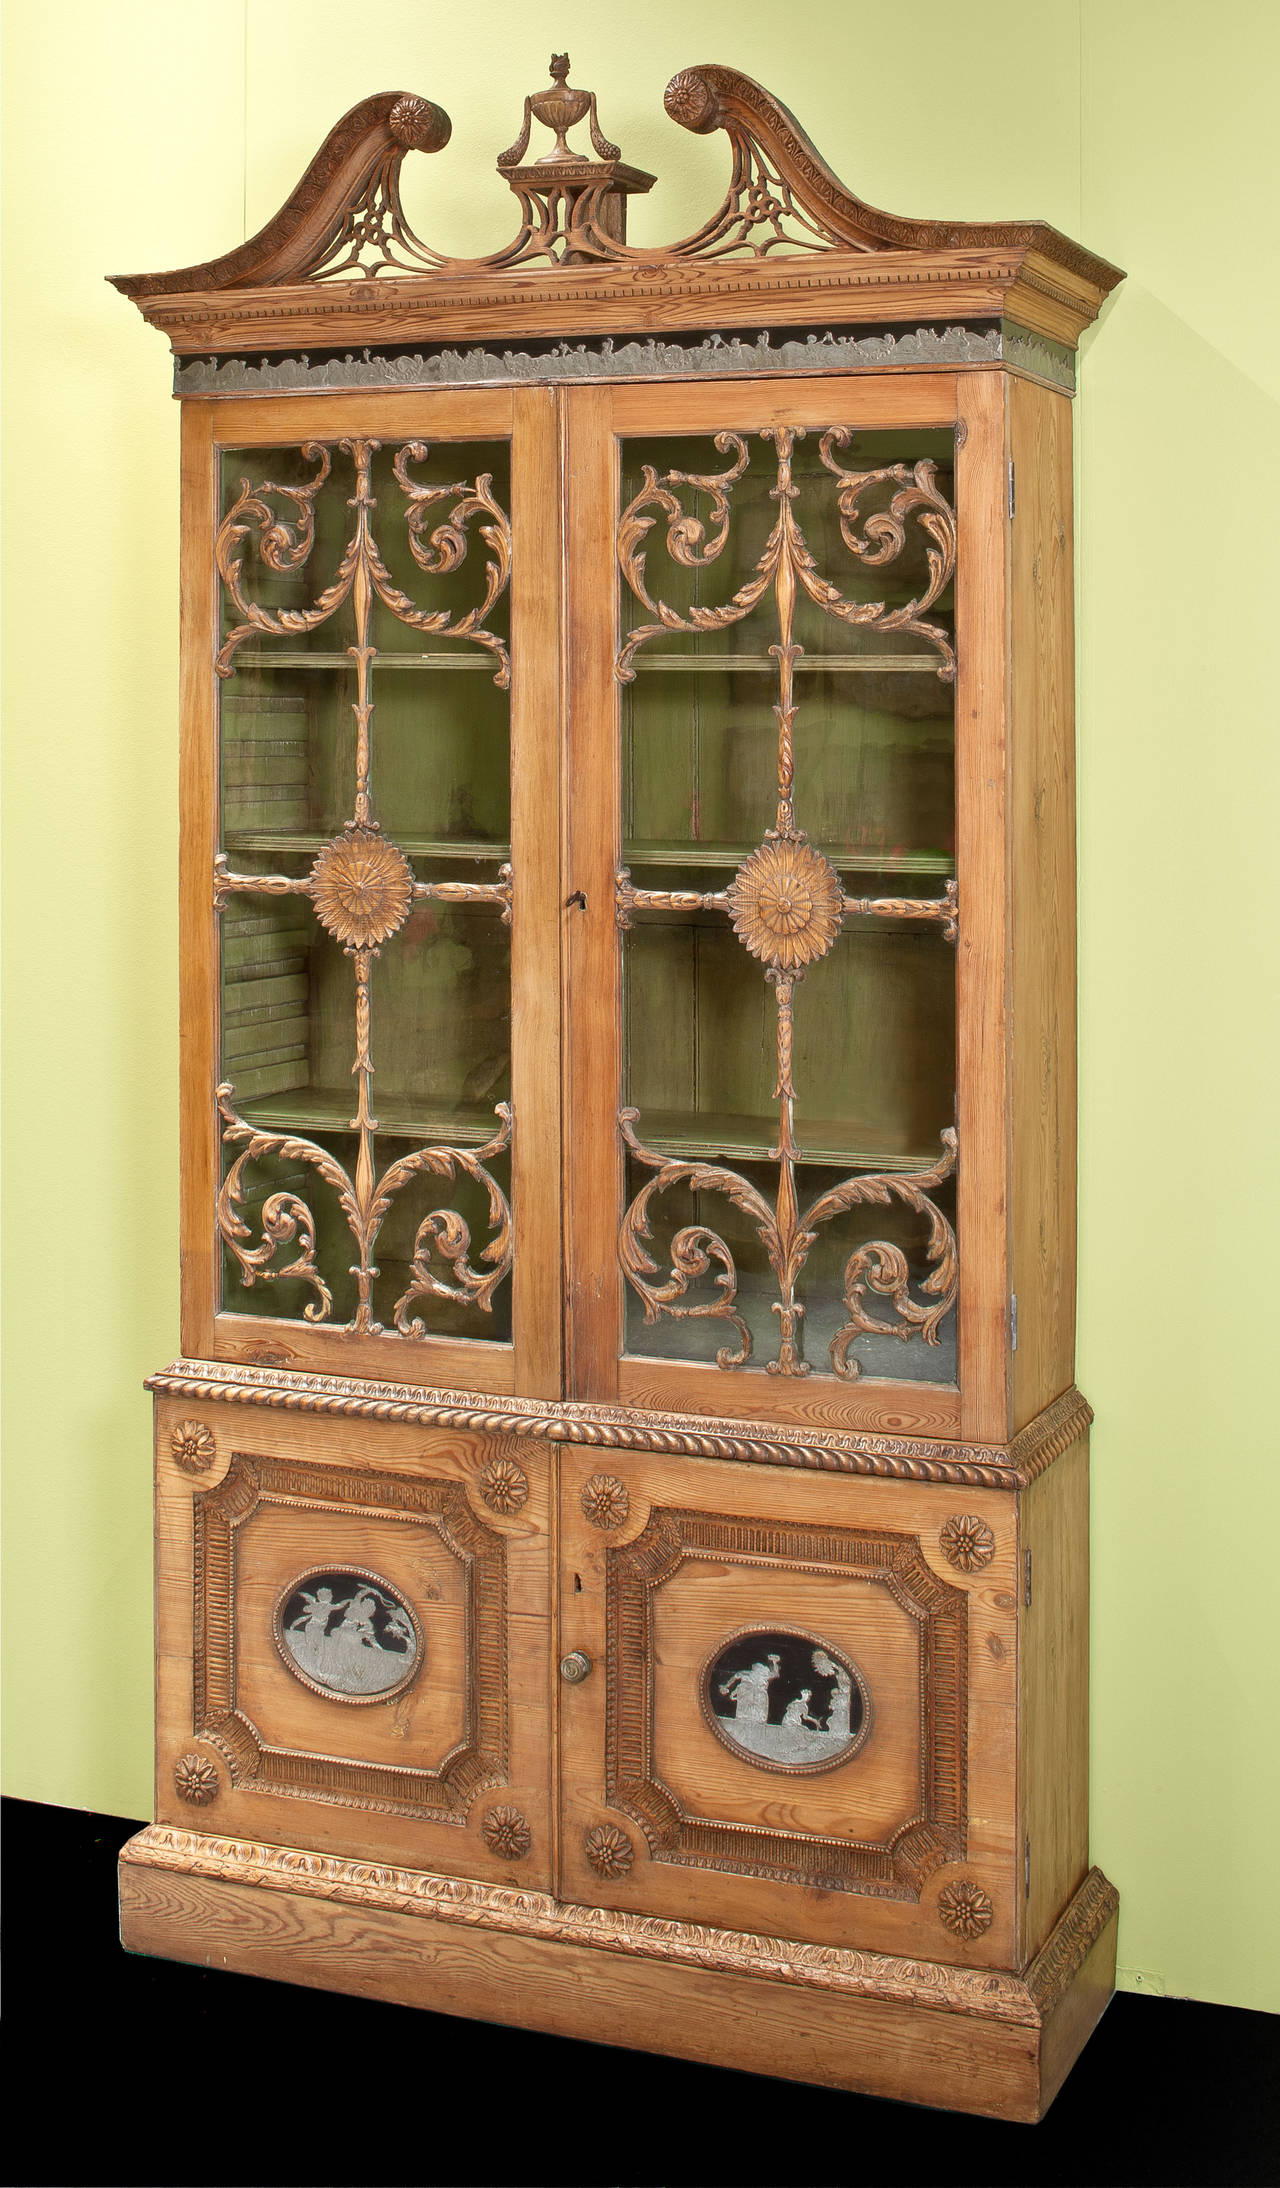 George III carved pine bookcase over cabinet, in the manner of Robert Adam, elaborately carved with pewter mounted ornaments depicting classical figures, likely originally painted.  English Circa 1775 				
The use of pewter on this bookcase relates